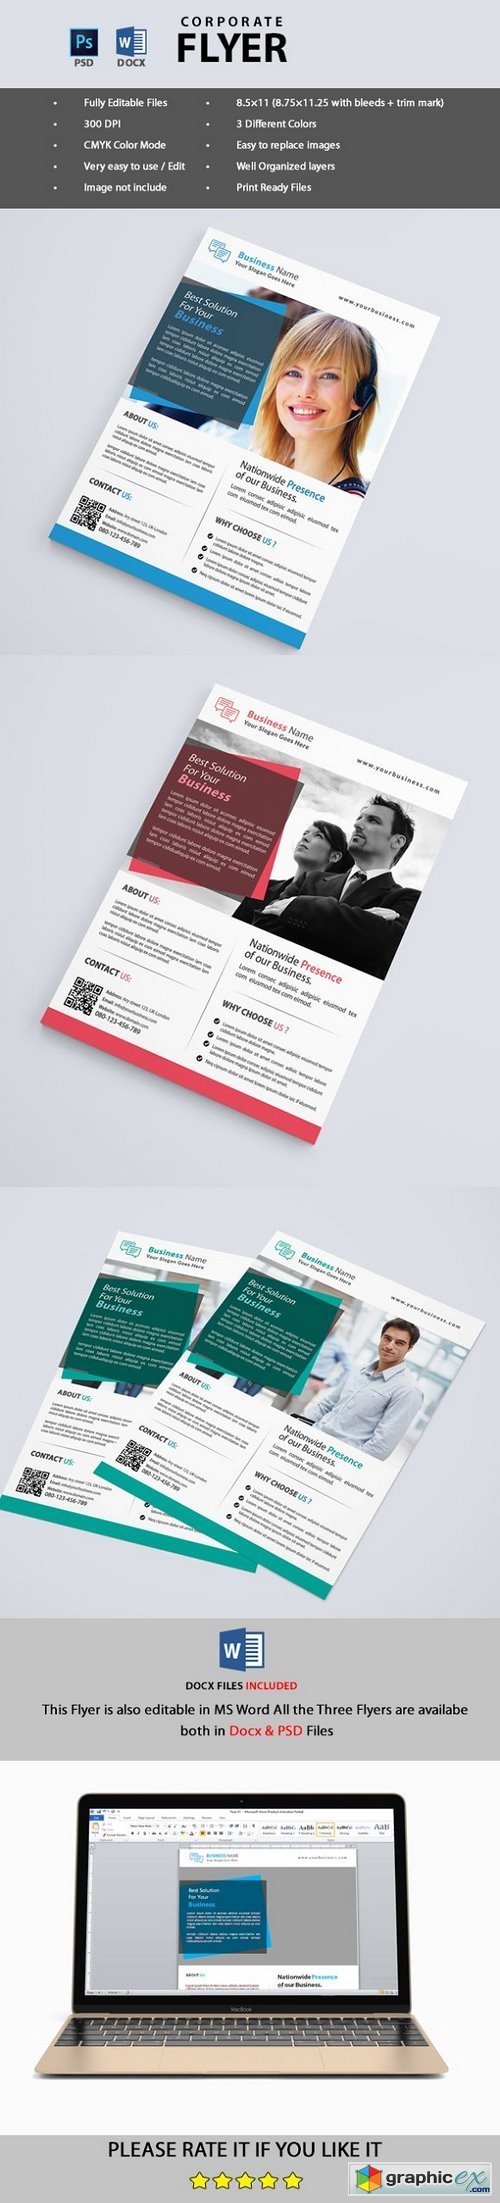 Corporate Flyer (PSD & MS Word)